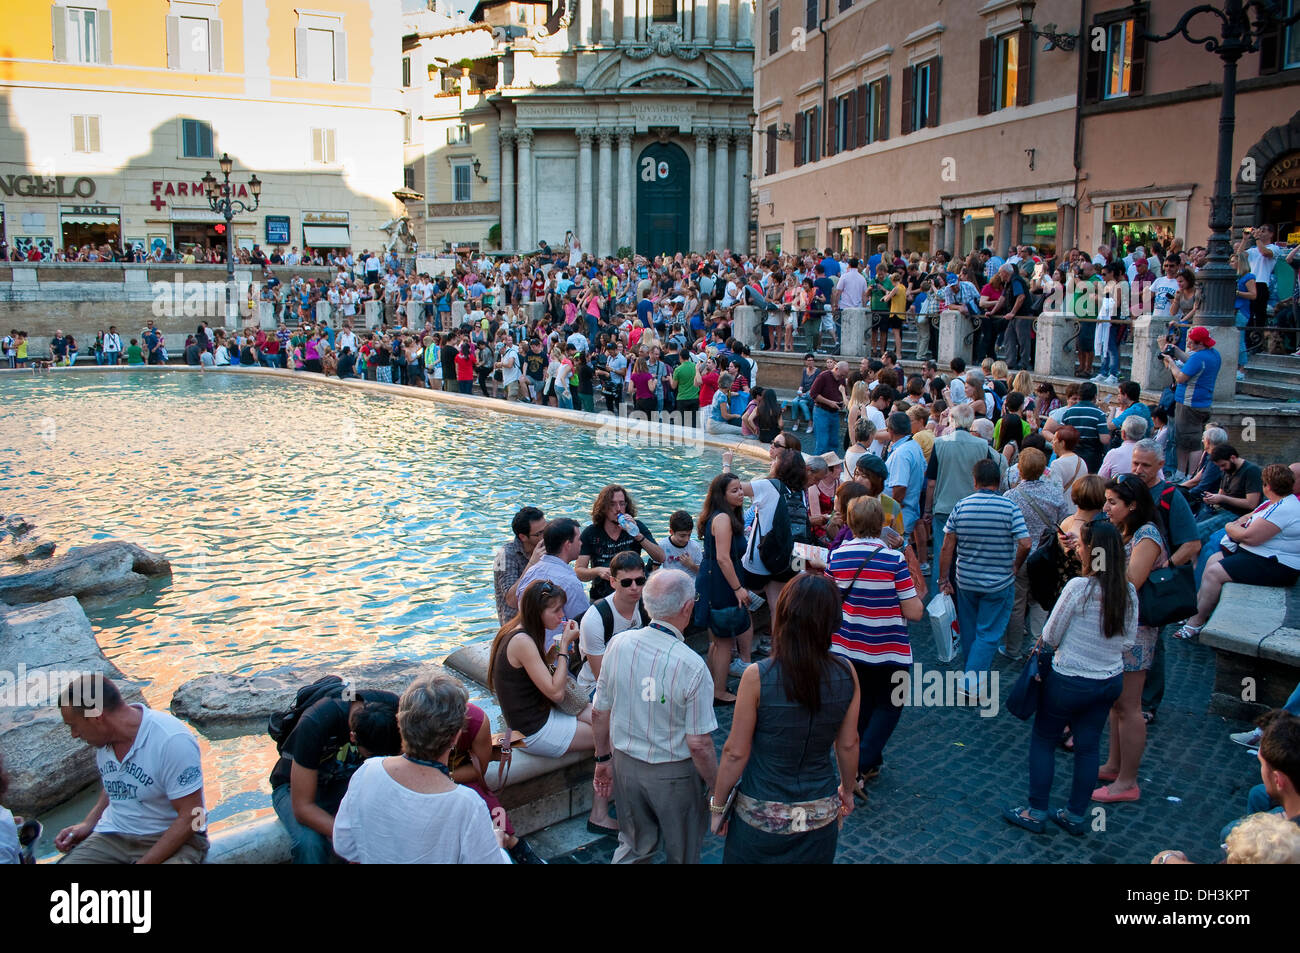 Crowds of tourists at Fontana di Trevi, Rome, Italy Stock Photo